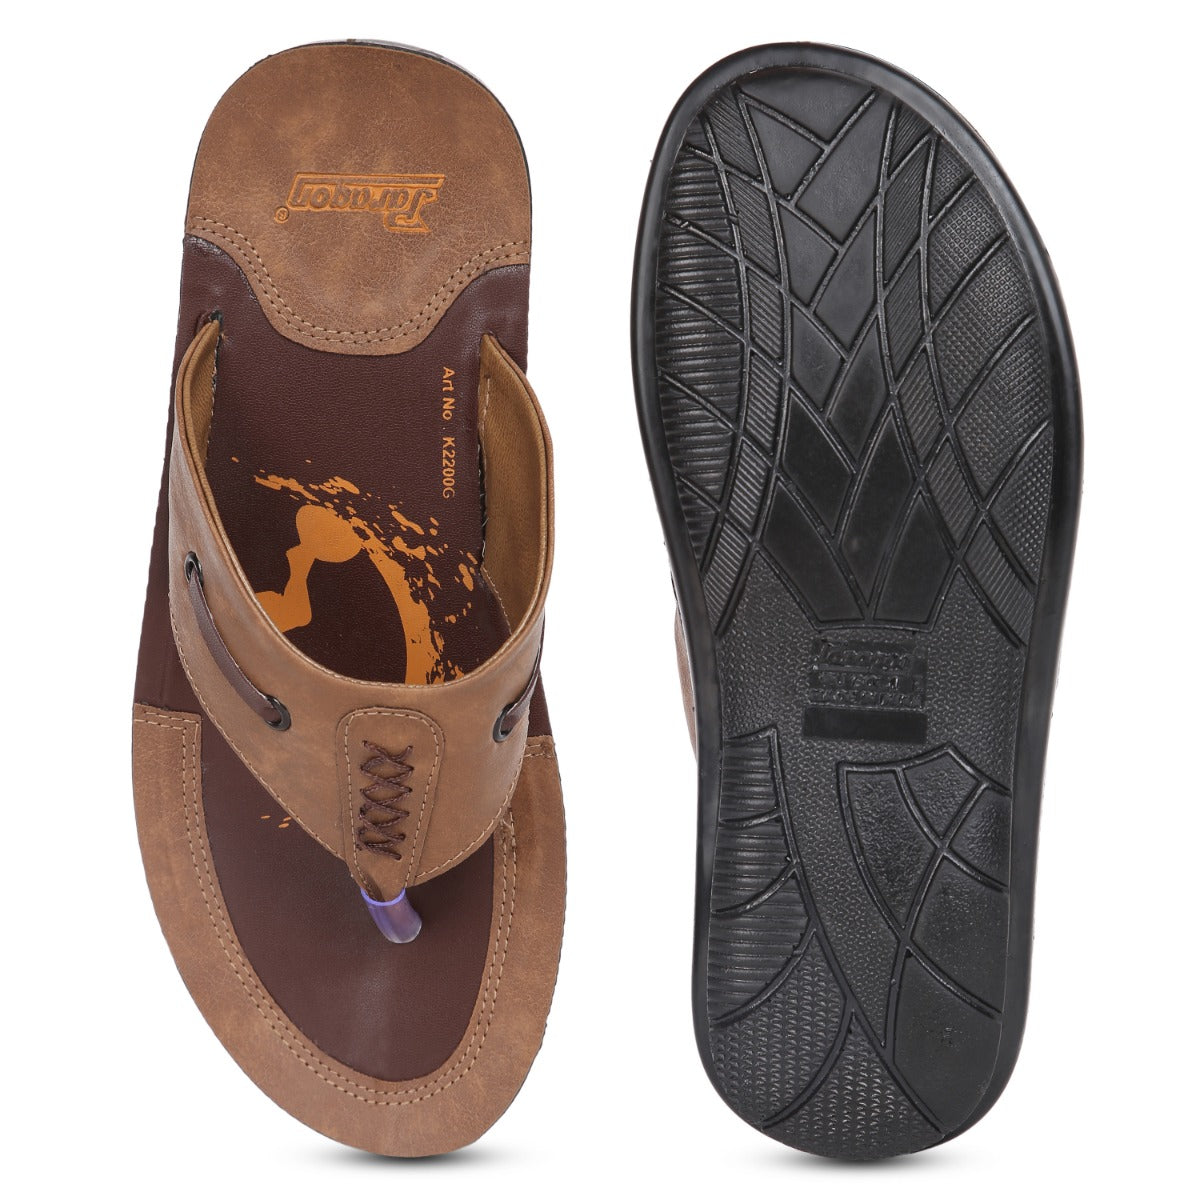 Paragon PUK2200G Men Stylish Sandals | Comfortable Sandals for Daily Outdoor Use | Casual Formal Sandals with Cushioned Soles